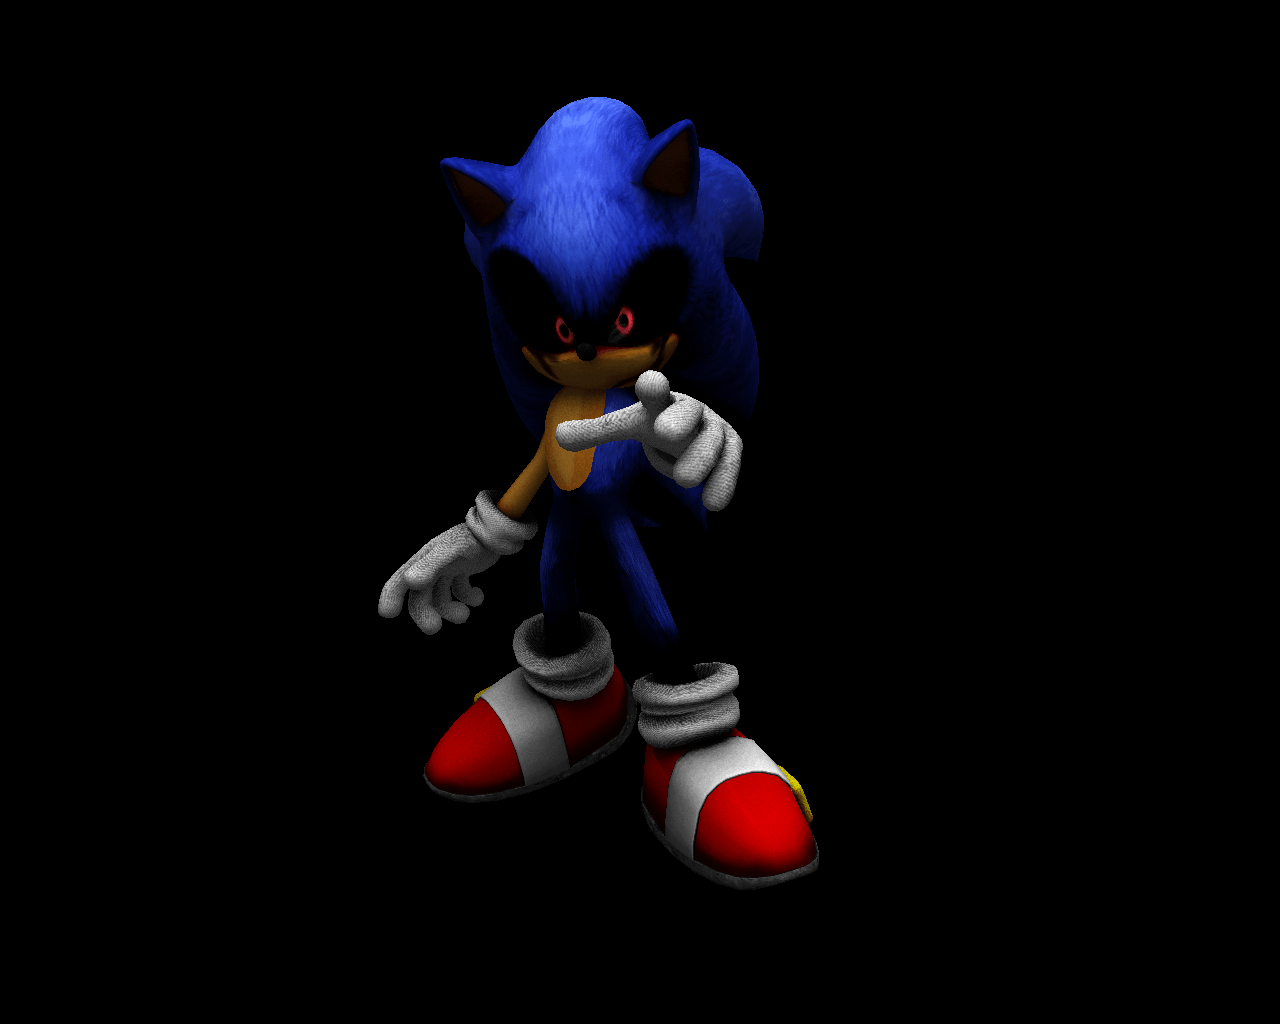 creepypasta4455 image Sonic.exe, HD wallpapers and backgrounds.